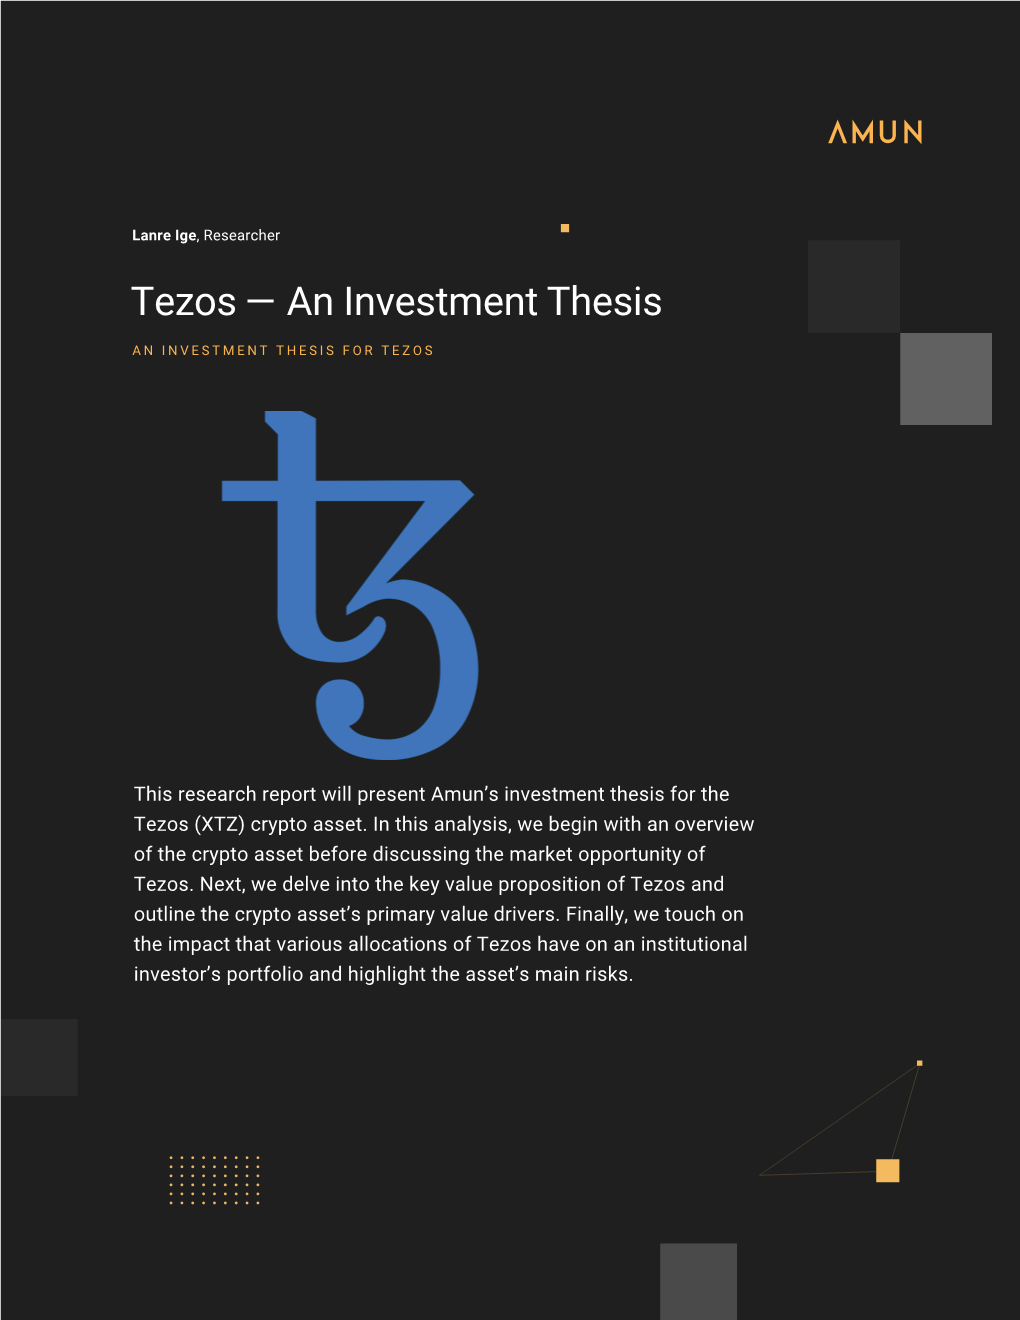 Tezos — an Investment Thesis